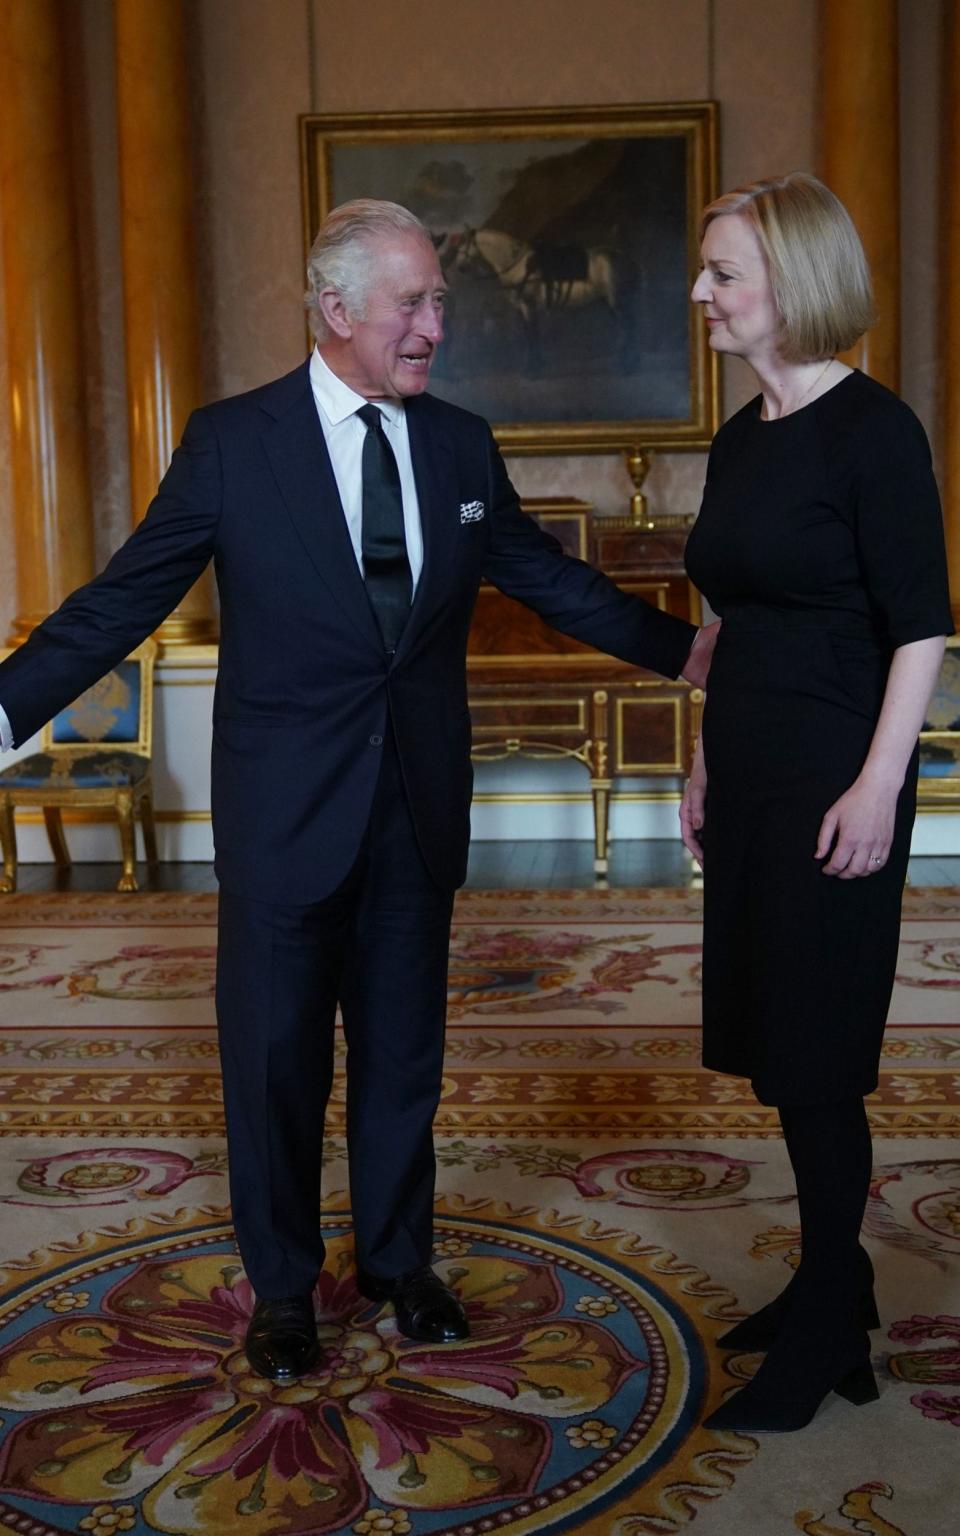 King Charles III during his first audience with Prime Minister Liz Truss at Buckingham Palace, London - Yui Mok/PA